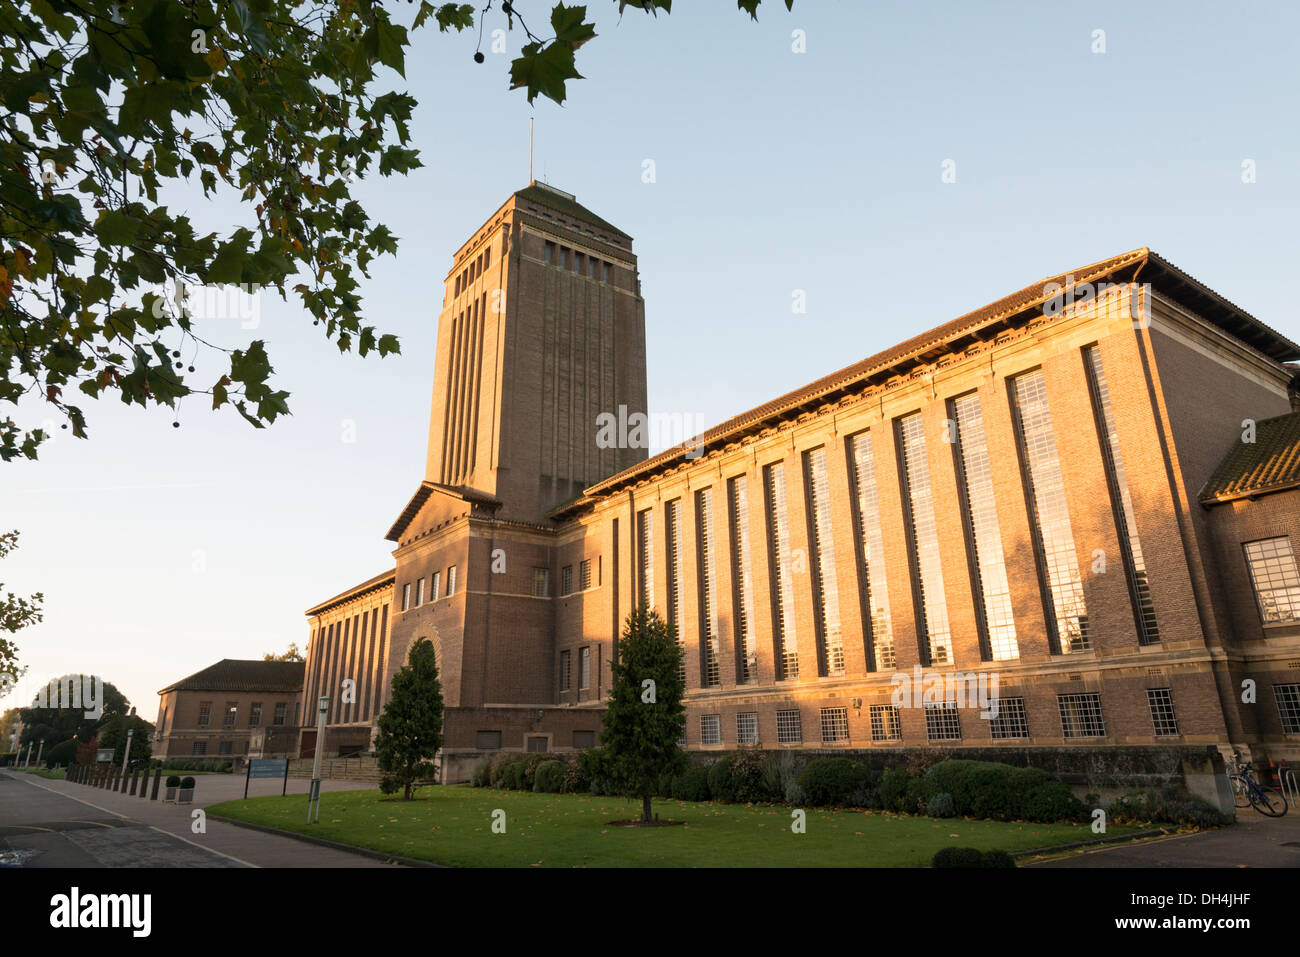 The Cambridge University Central Library building taken at dawn Stock Photo